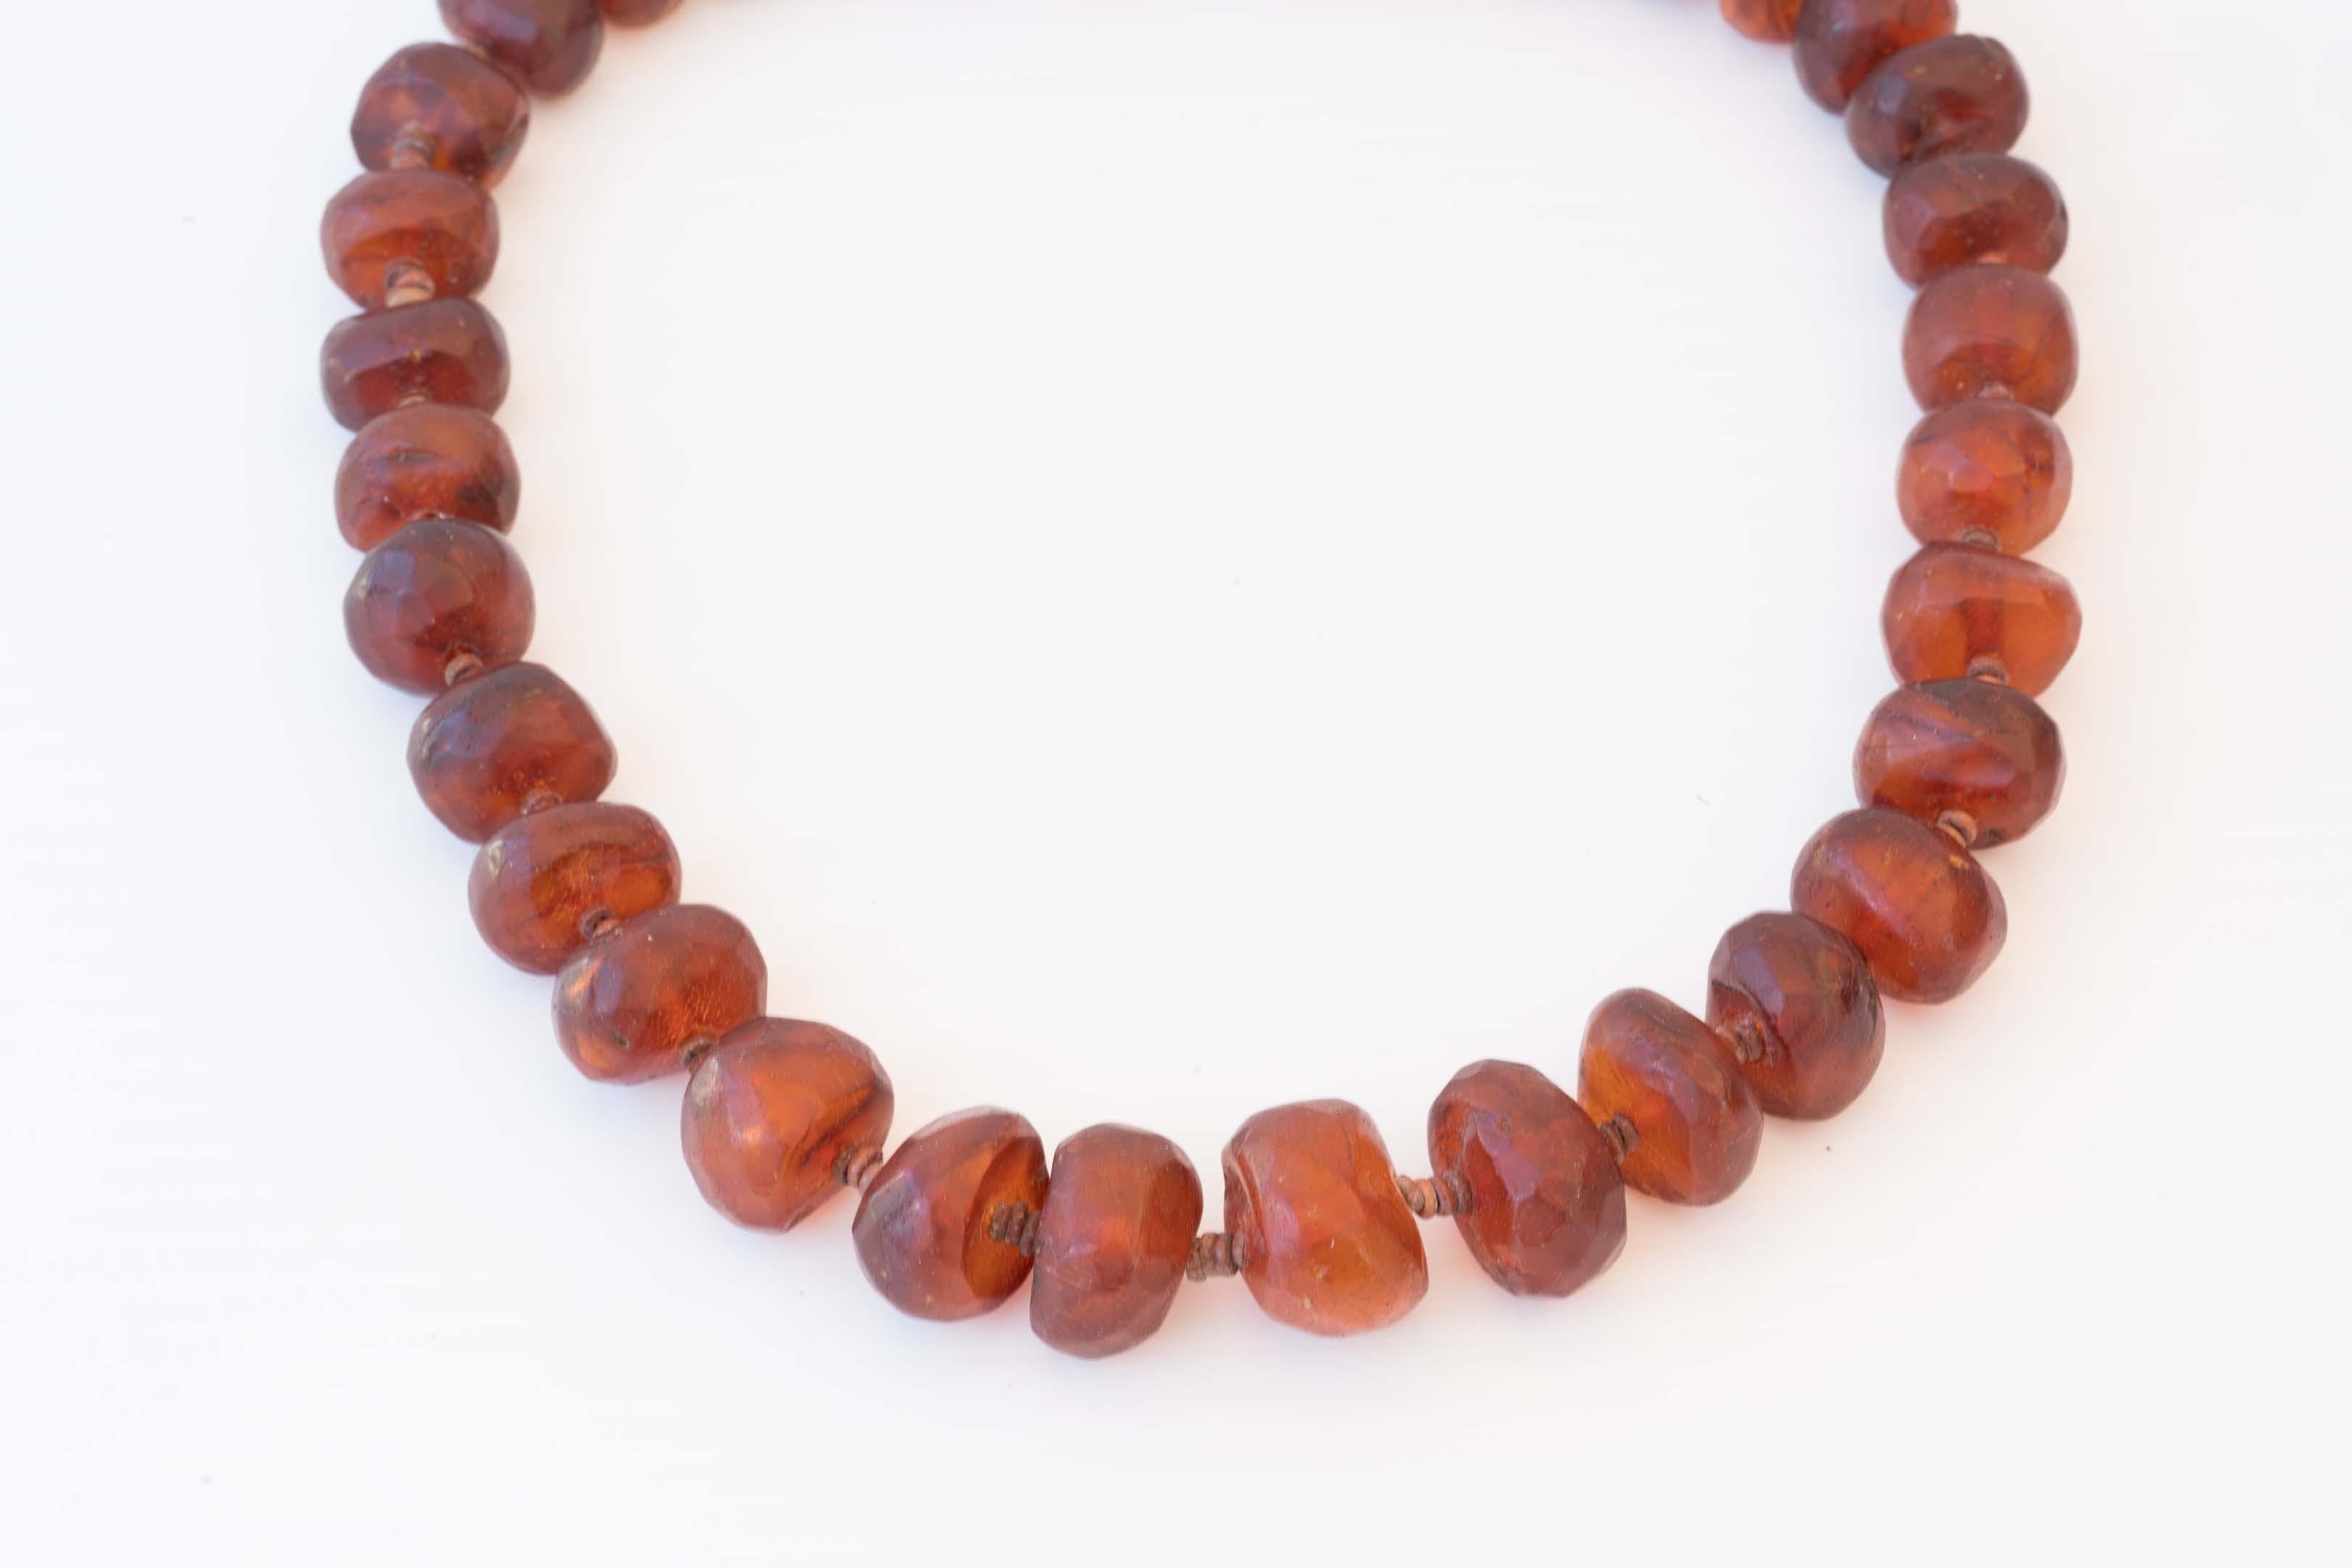 Bead Rare Burmite Amber Fossil Tribal Necklace from 19th Century For Sale